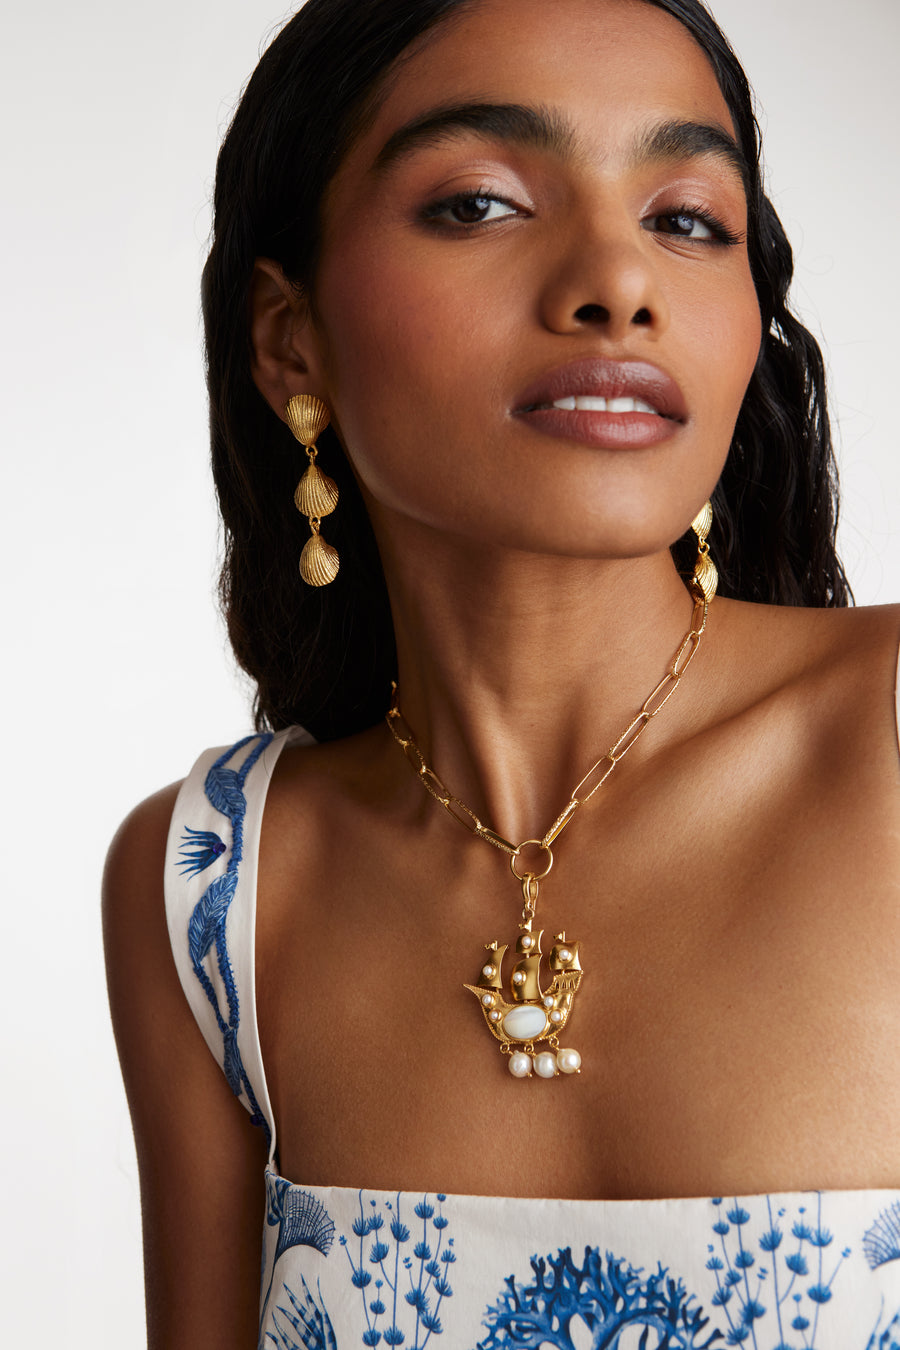 model shot wearing pearl embellished sailing ship charm on a charm necklace and wearing shell drop earrings.  